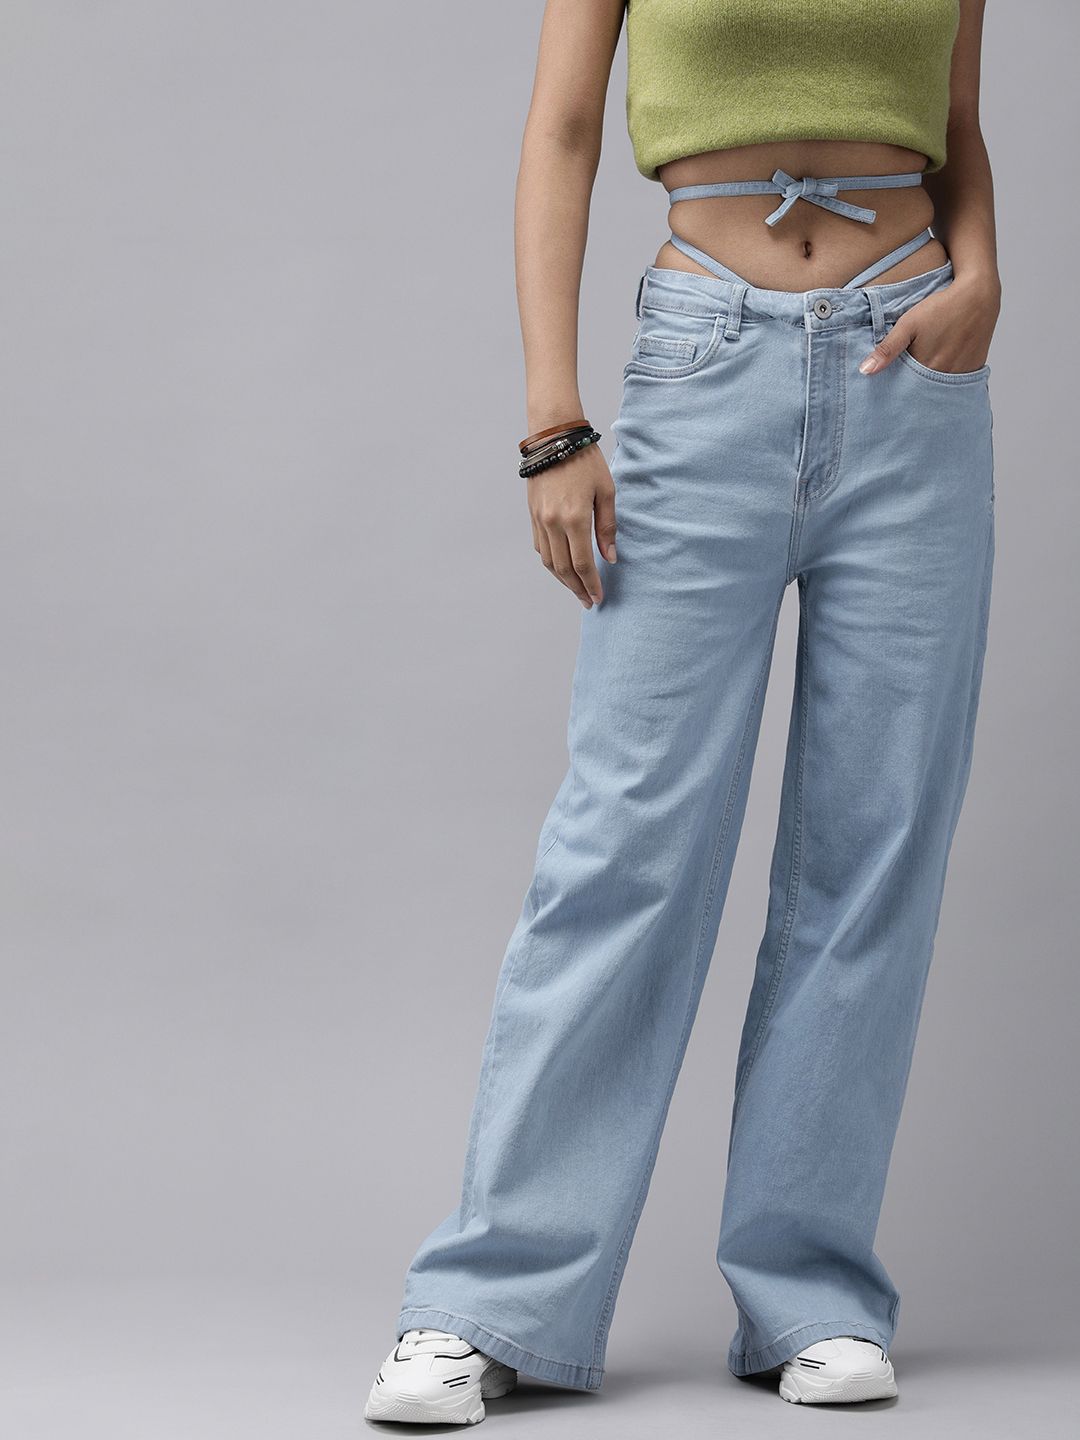 The Roadster Lifestyle Co Women Light Blue Wide Leg Stretchable Jeans With Tie Up Detail Price in India